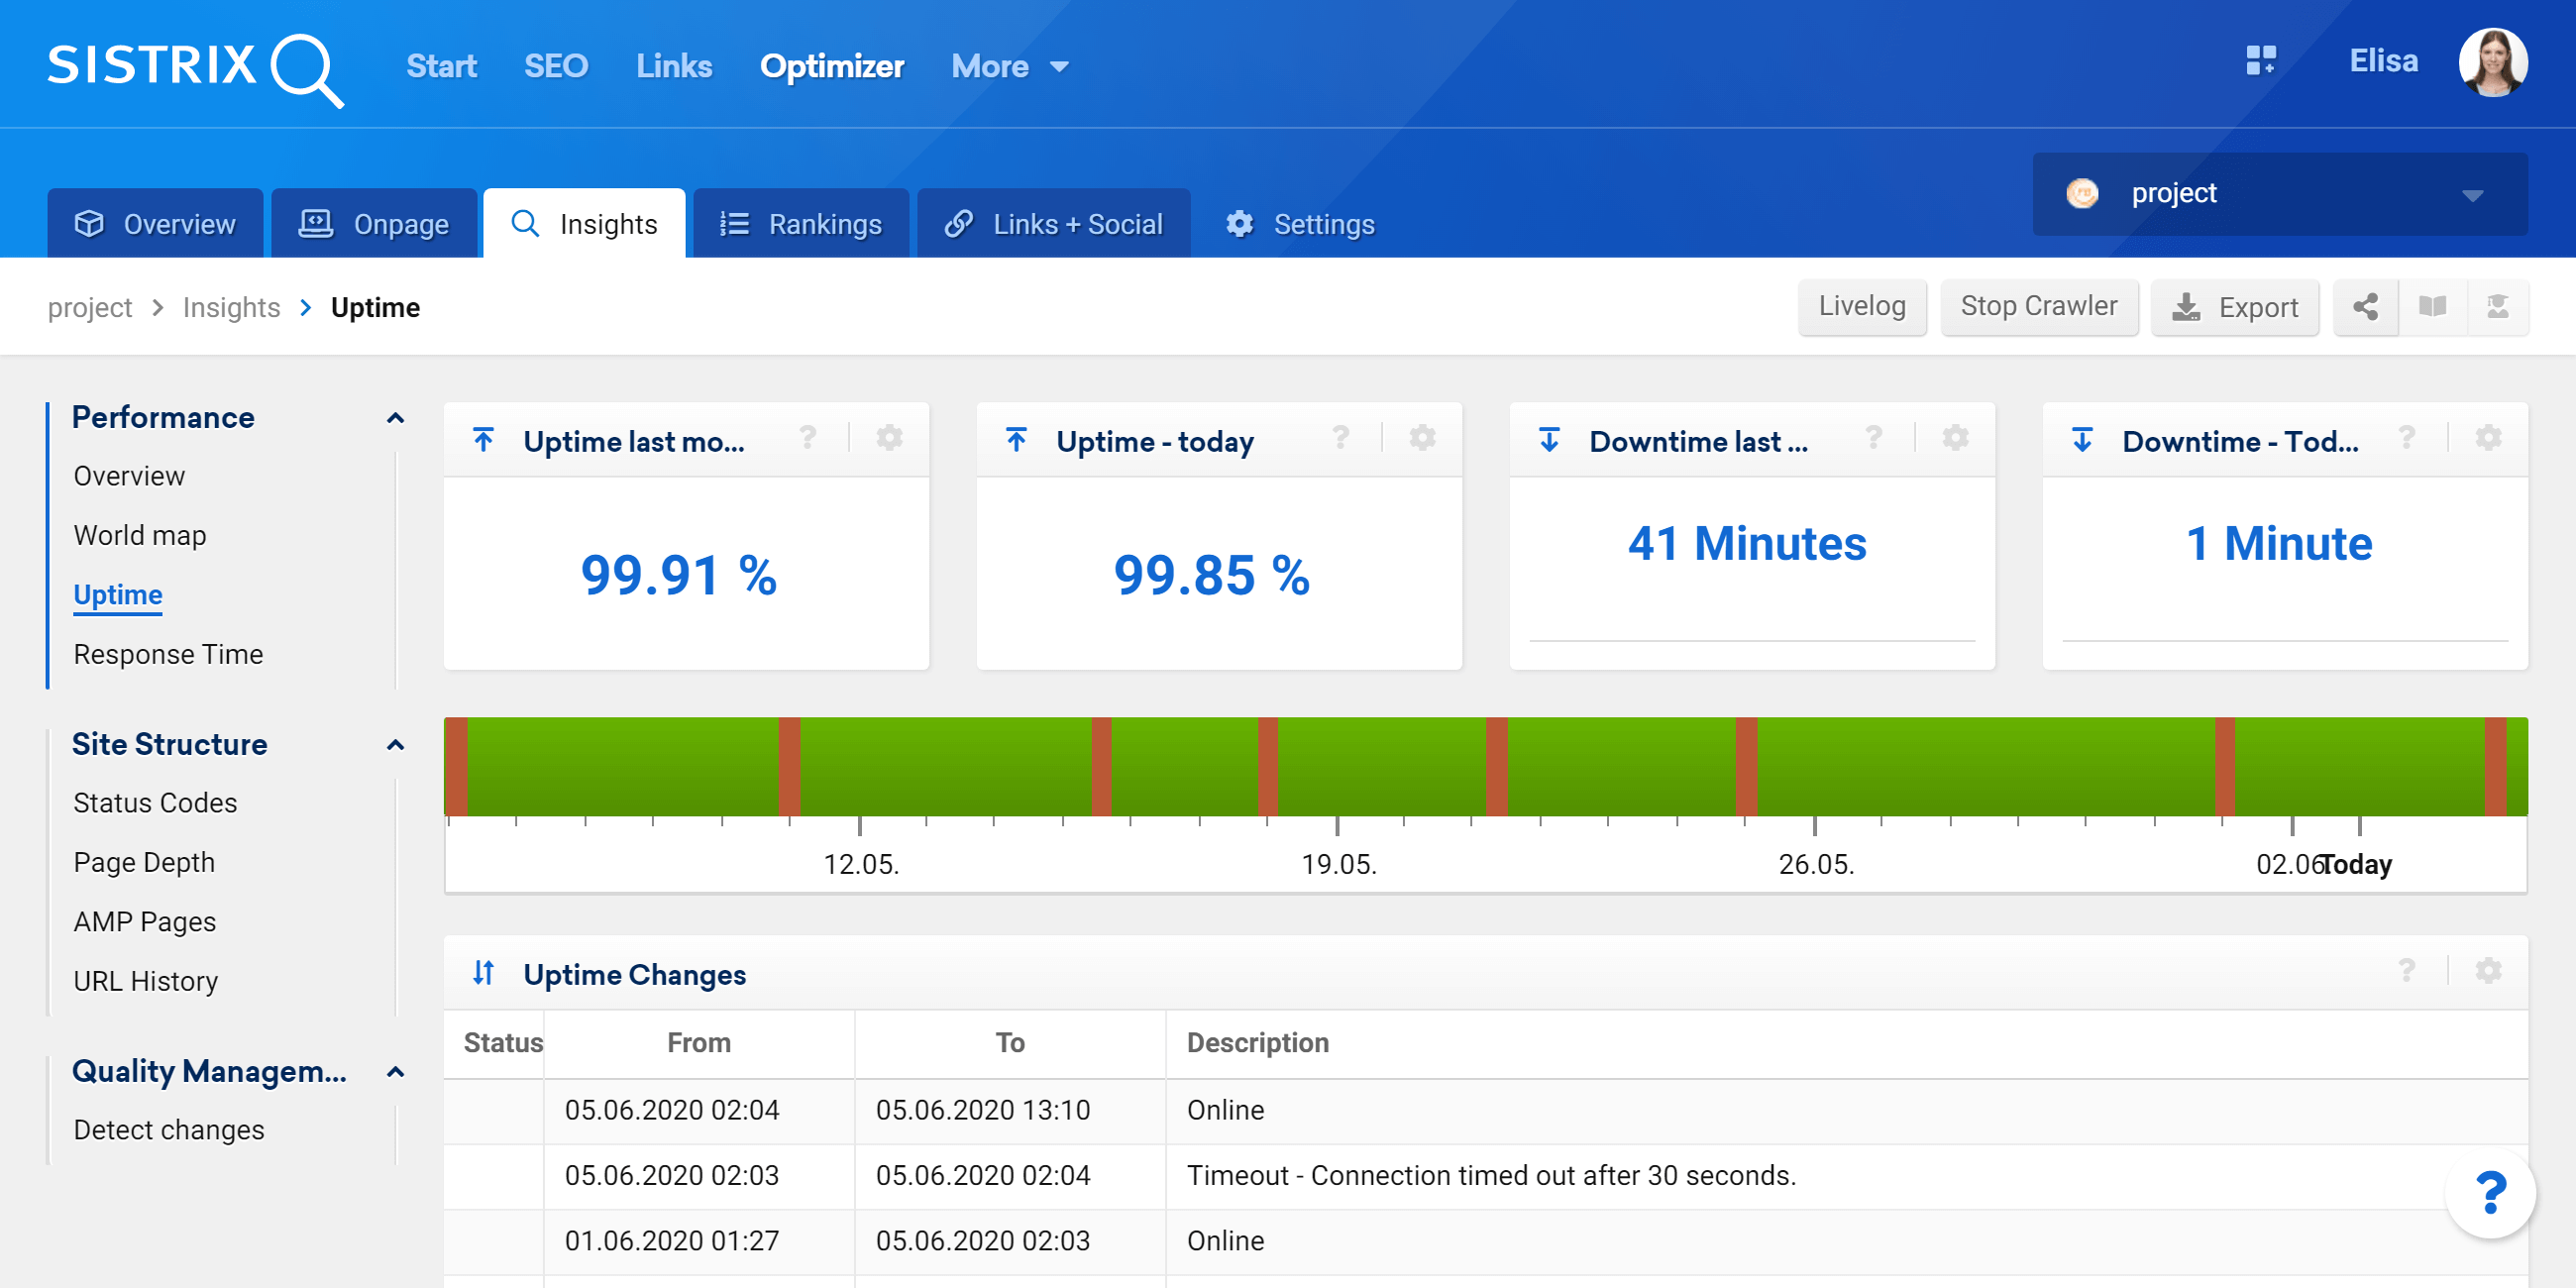 The section Uptime in the SISTRIX Optimizer